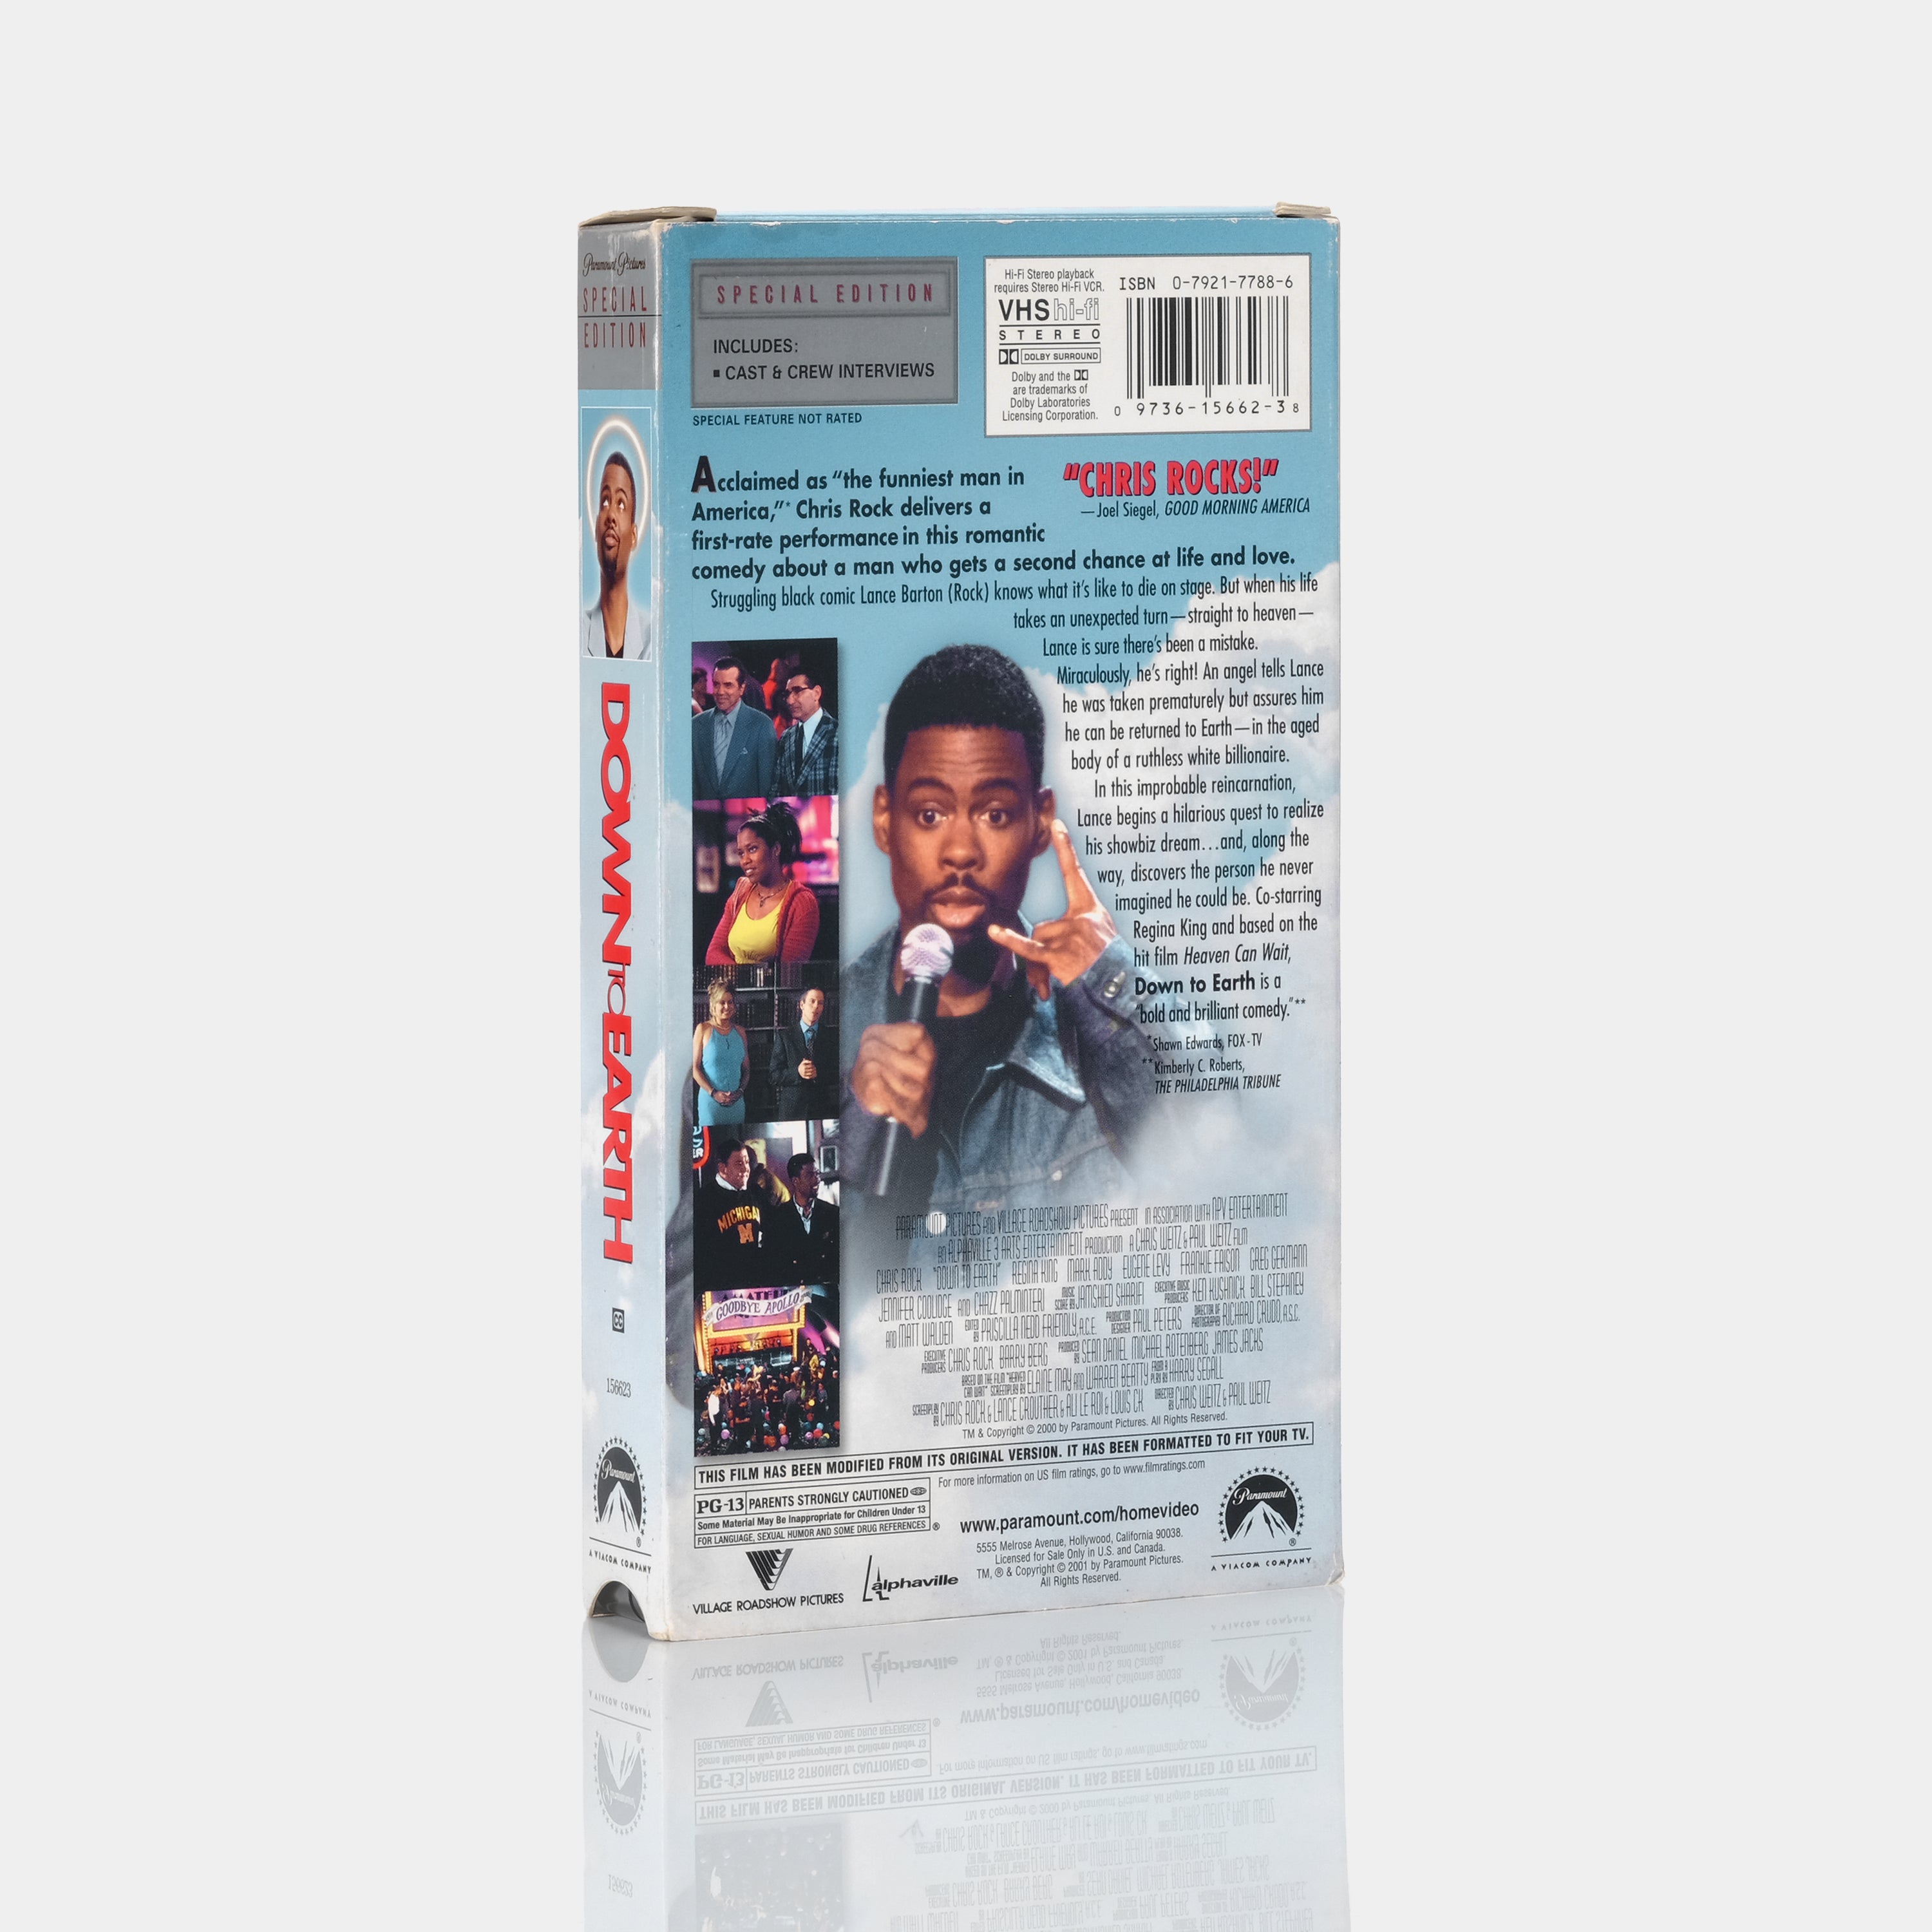 Down to Earth VHS Tape